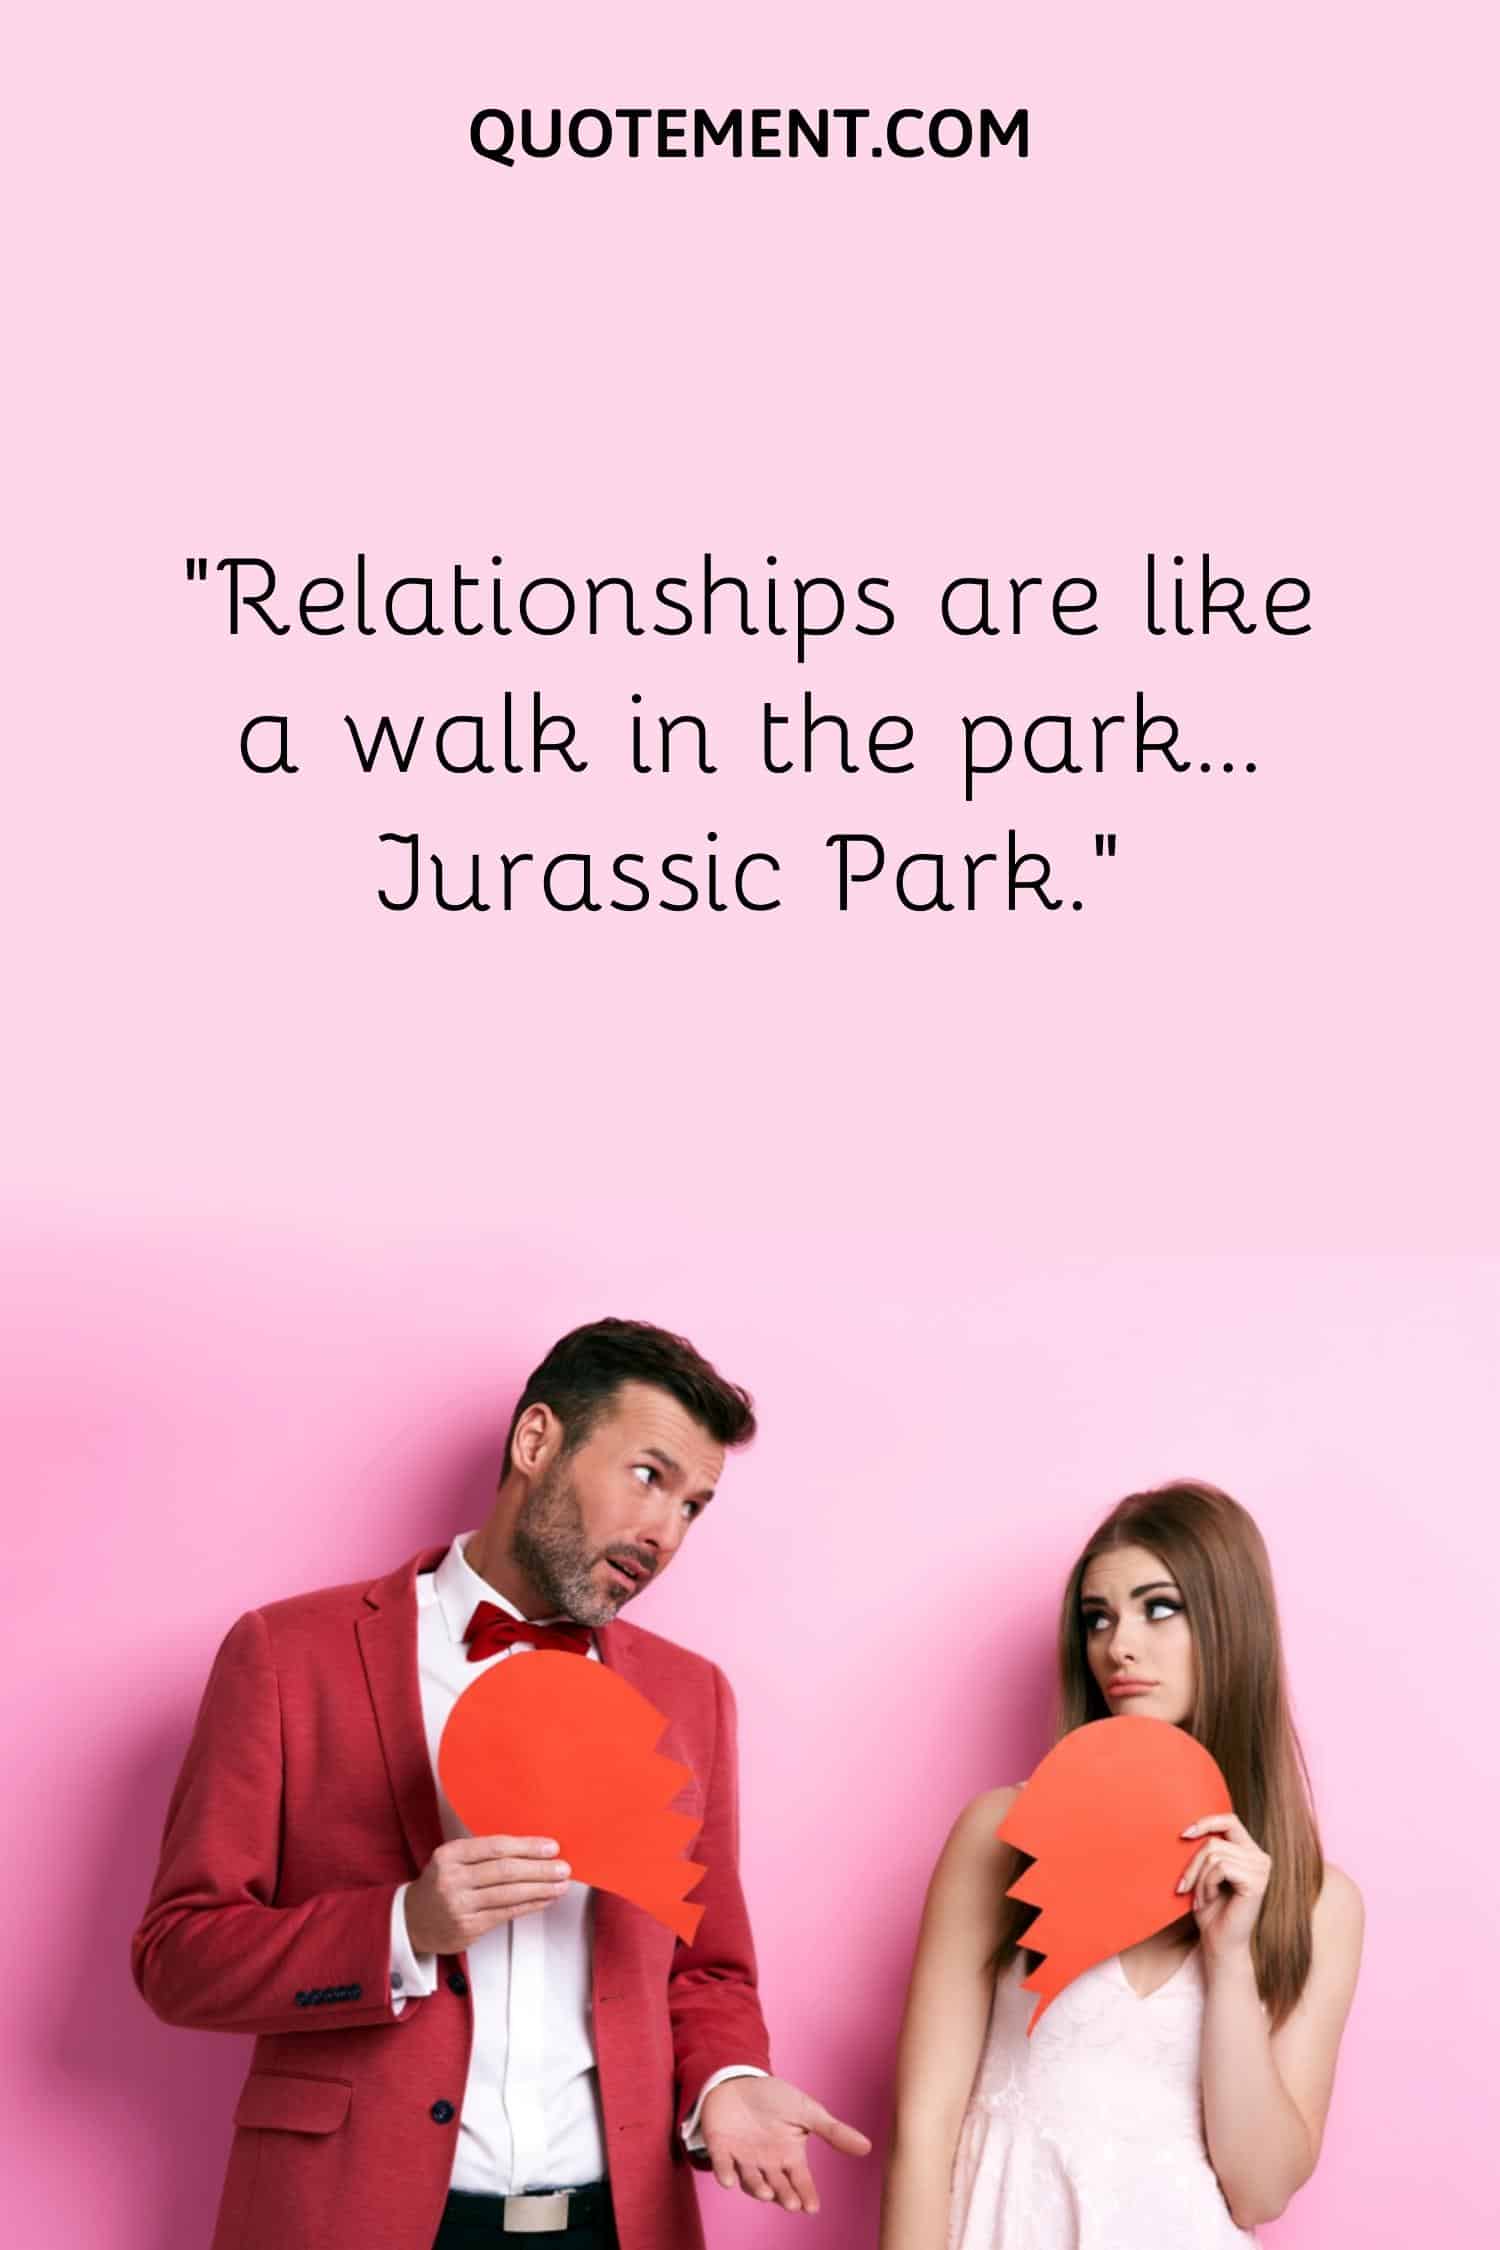 “Relationships are like a walk in the park…Jurassic Park.”